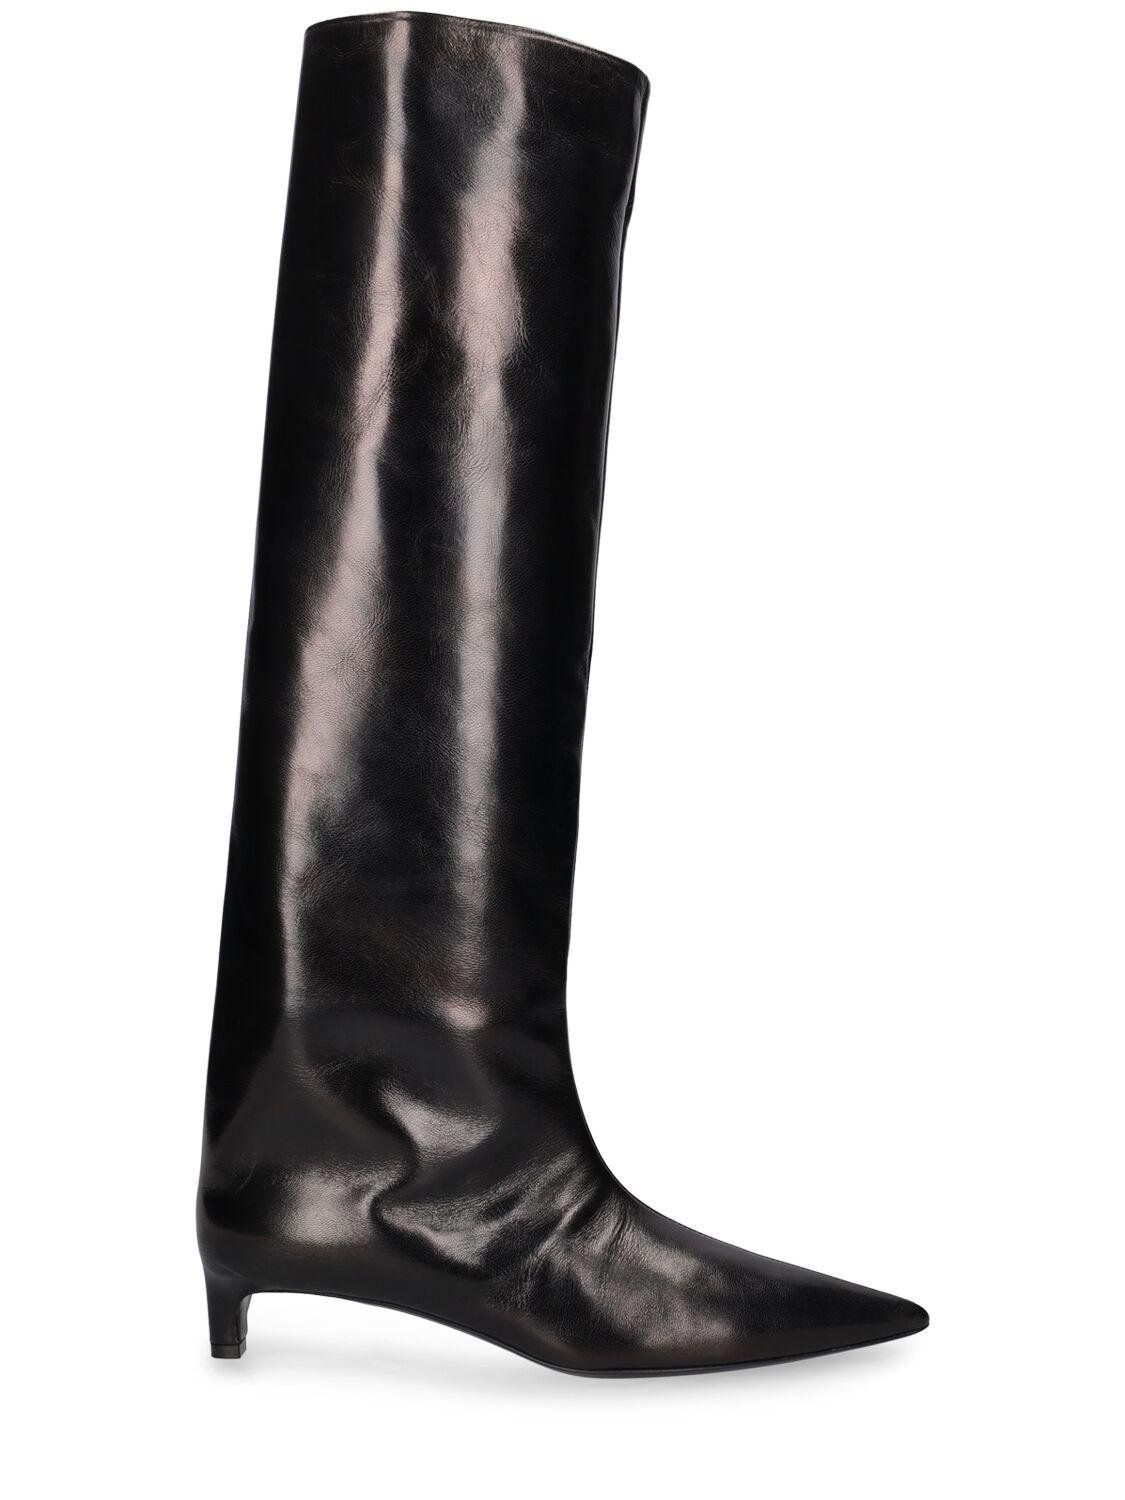 35mm Leather Tall Boots by JIL SANDER